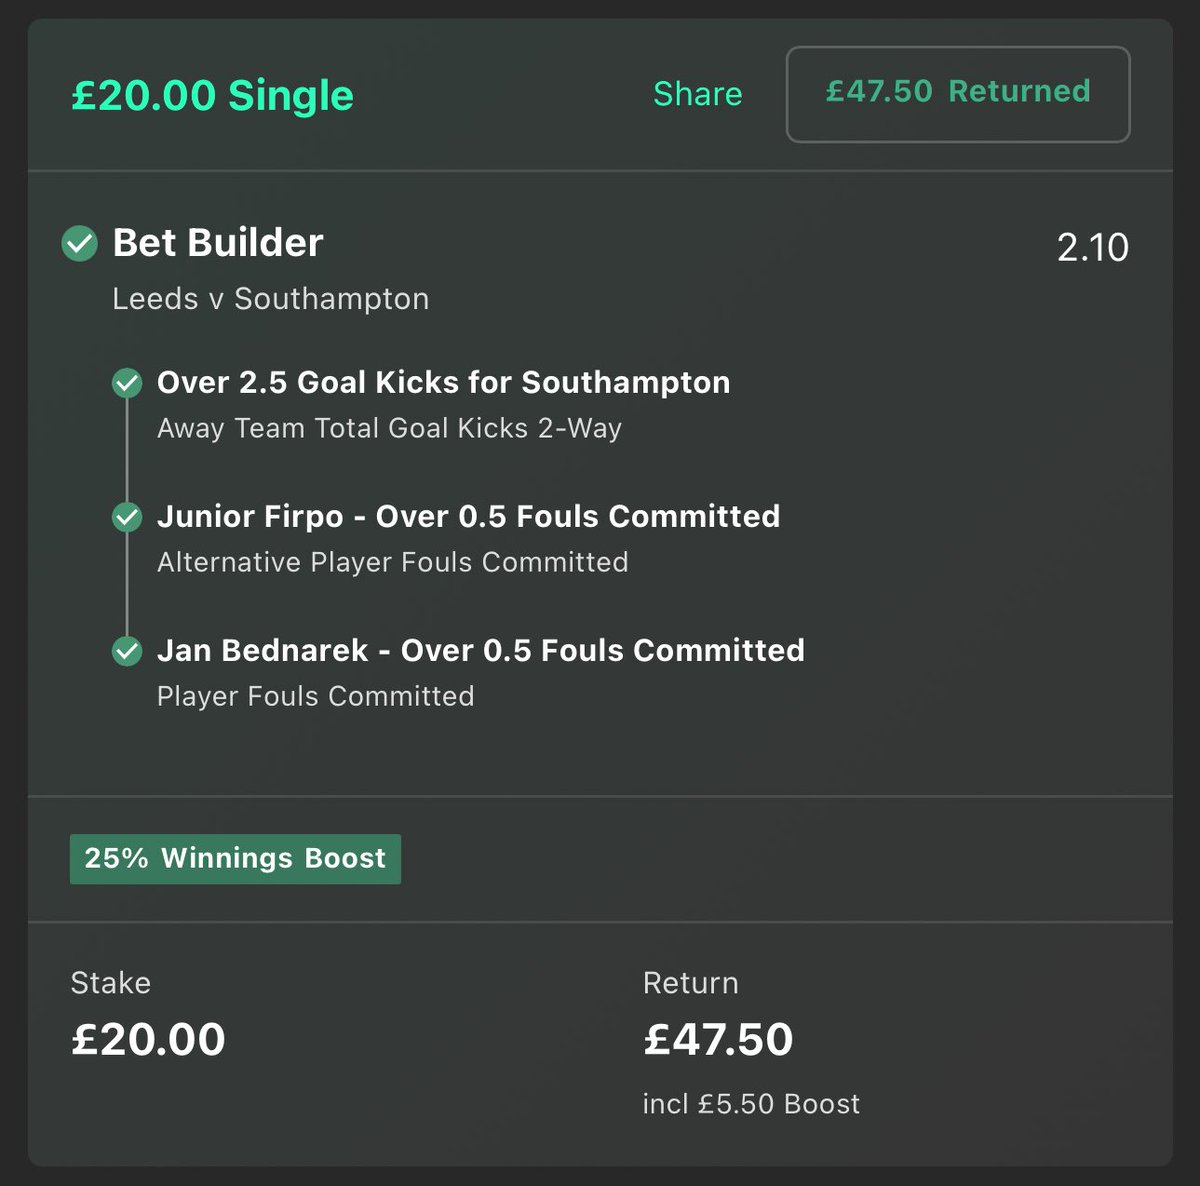 😍 BOOOM! 

£20 staked on all of our bet builders this season has now returned £1,101.50 profit ✅💰

We will giveaway £20 from the winnings to someone who LIKES this post!!! ❤️